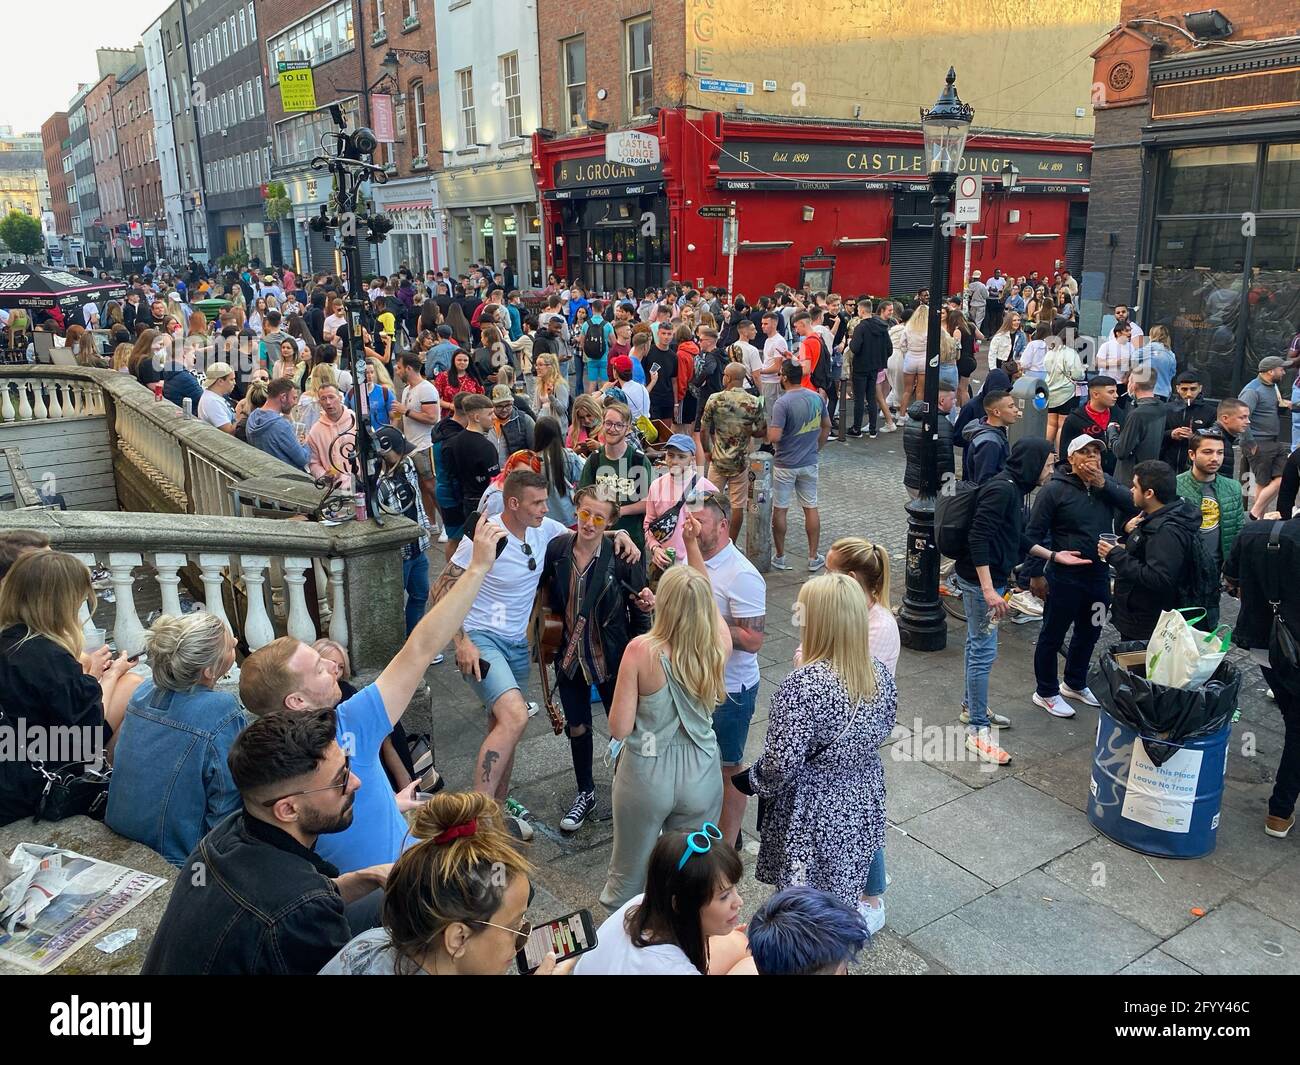 Revellers in south William street, Dublin. The chief medical officer, Dr Tony Holohan, has hit out at scenes of Òenormous crowdsÓ gathered in Dublin city centre, saying it was what the country Òdoes not needÓ after making so much progress pushing down cases of Covid-19. Picture date: Sunday May 30, 2021. Stock Photo